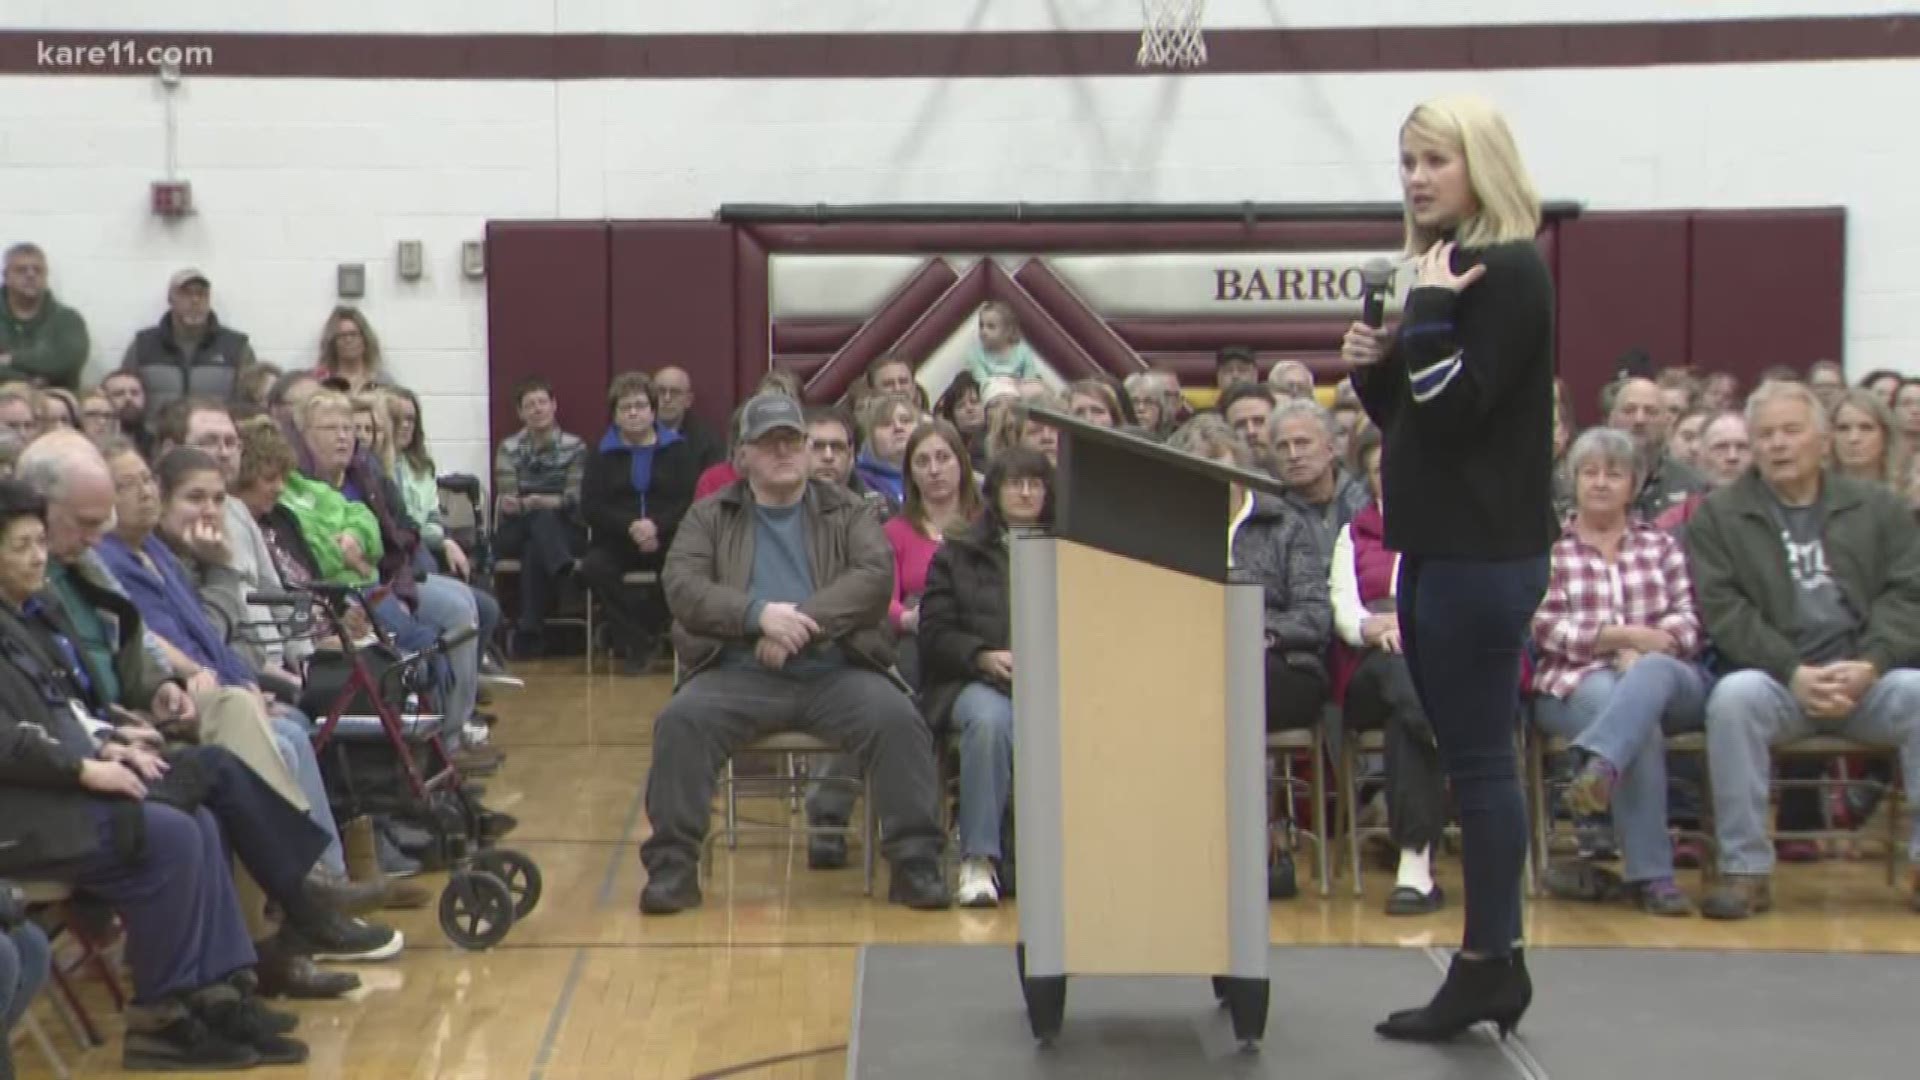 Smart spoke at Barron High School to help the community after the return of Jayme Closs, who escaped the home of Jake Patterson over two months ago.